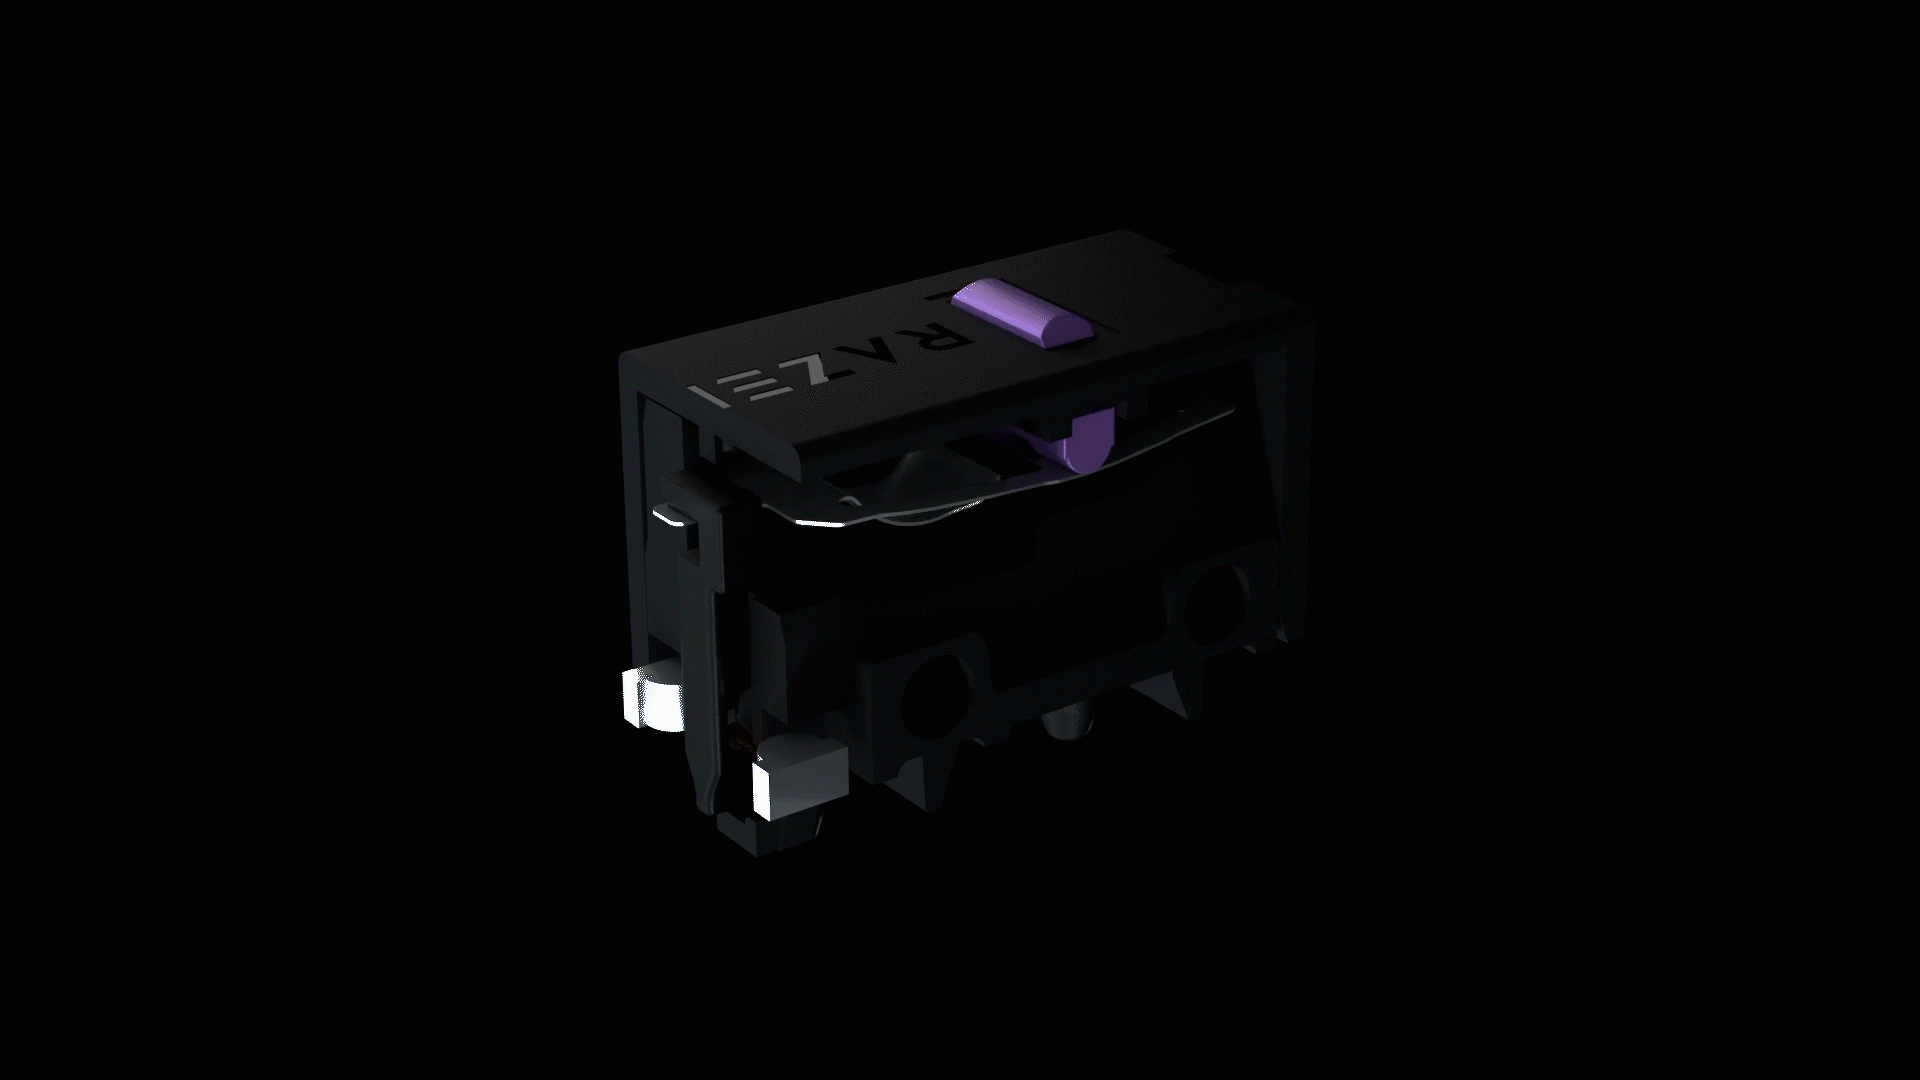 The-Razer-Viper-mouse-features-optical-switches.gif